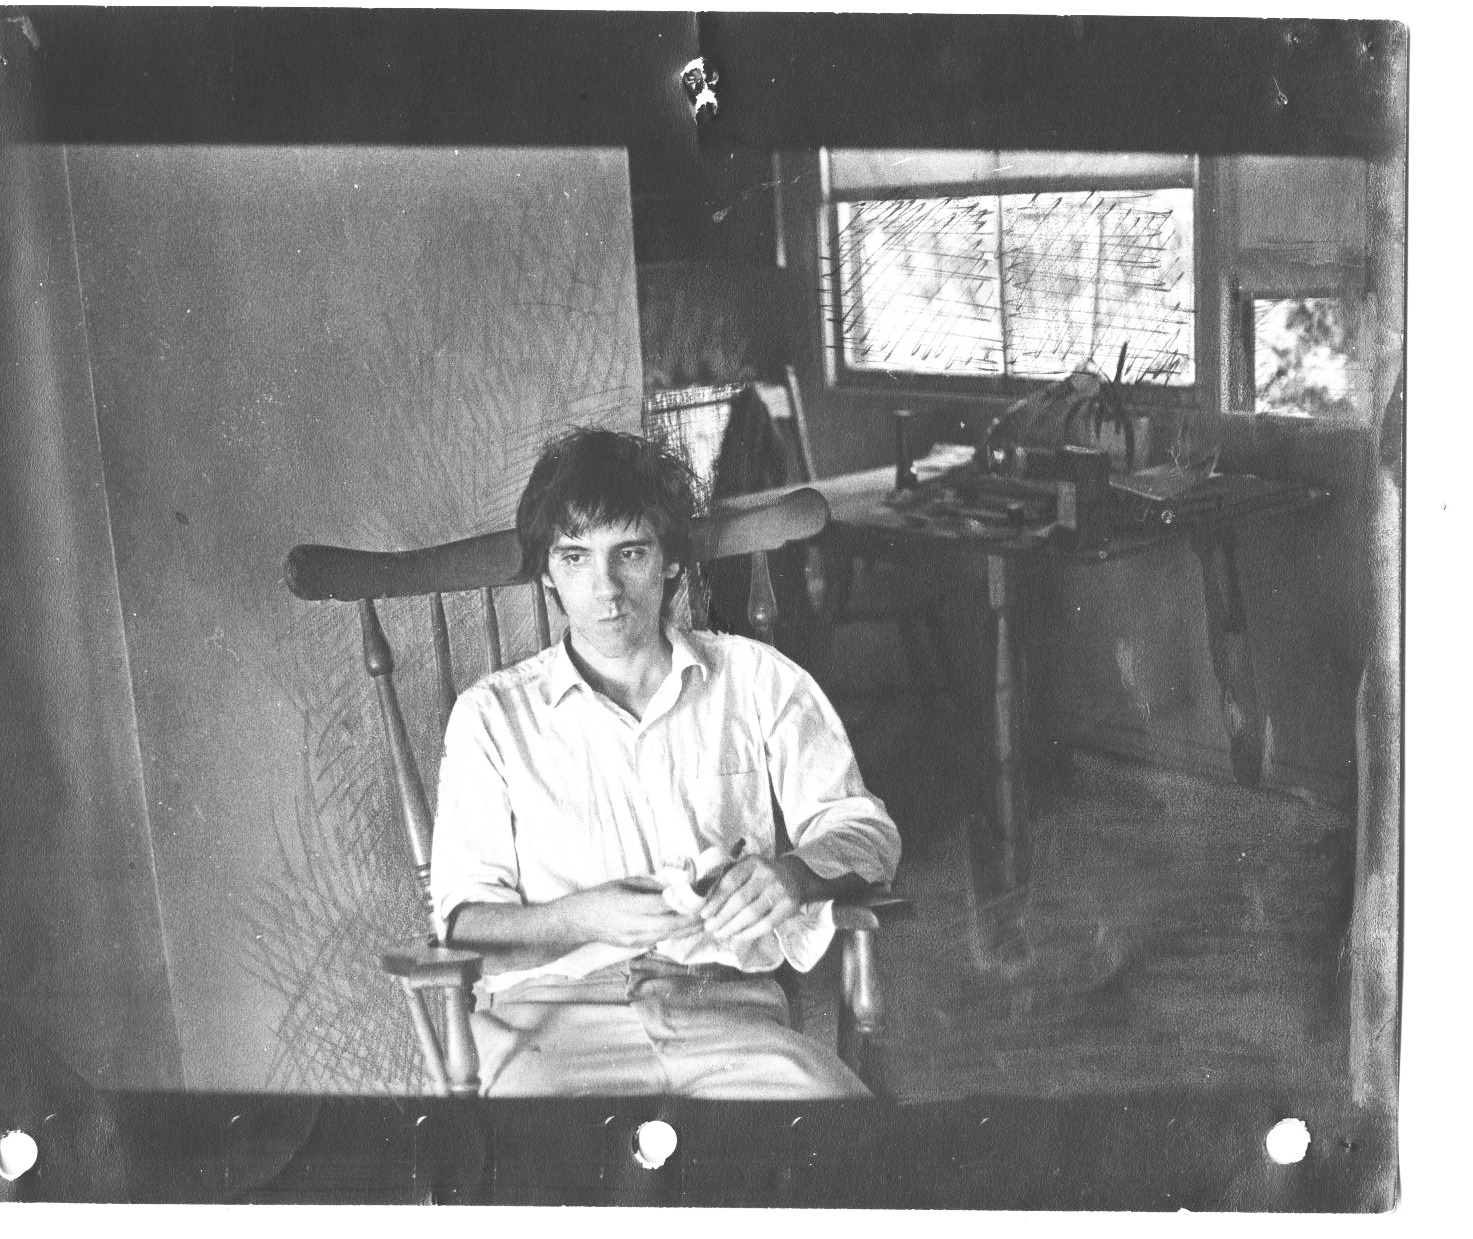 black and white po of man seated on chair in kitchen